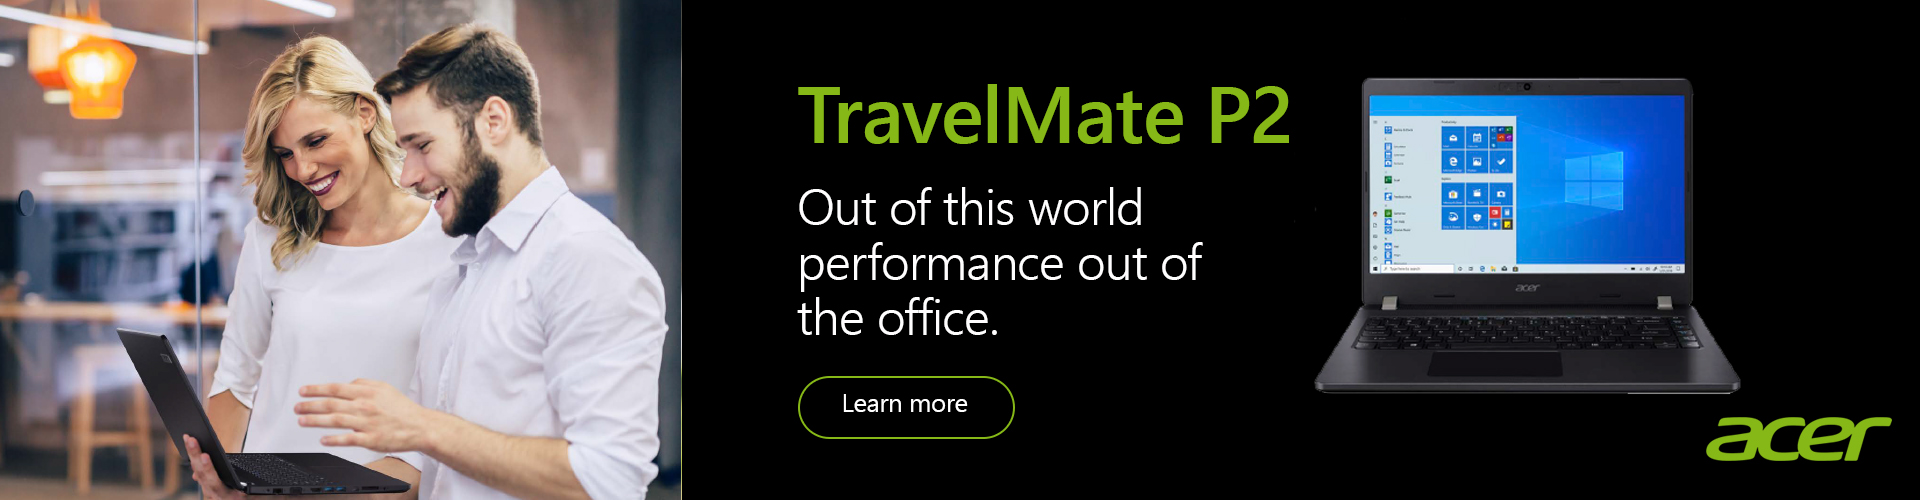 TravelMate P2 - Out of this world performance out of the office